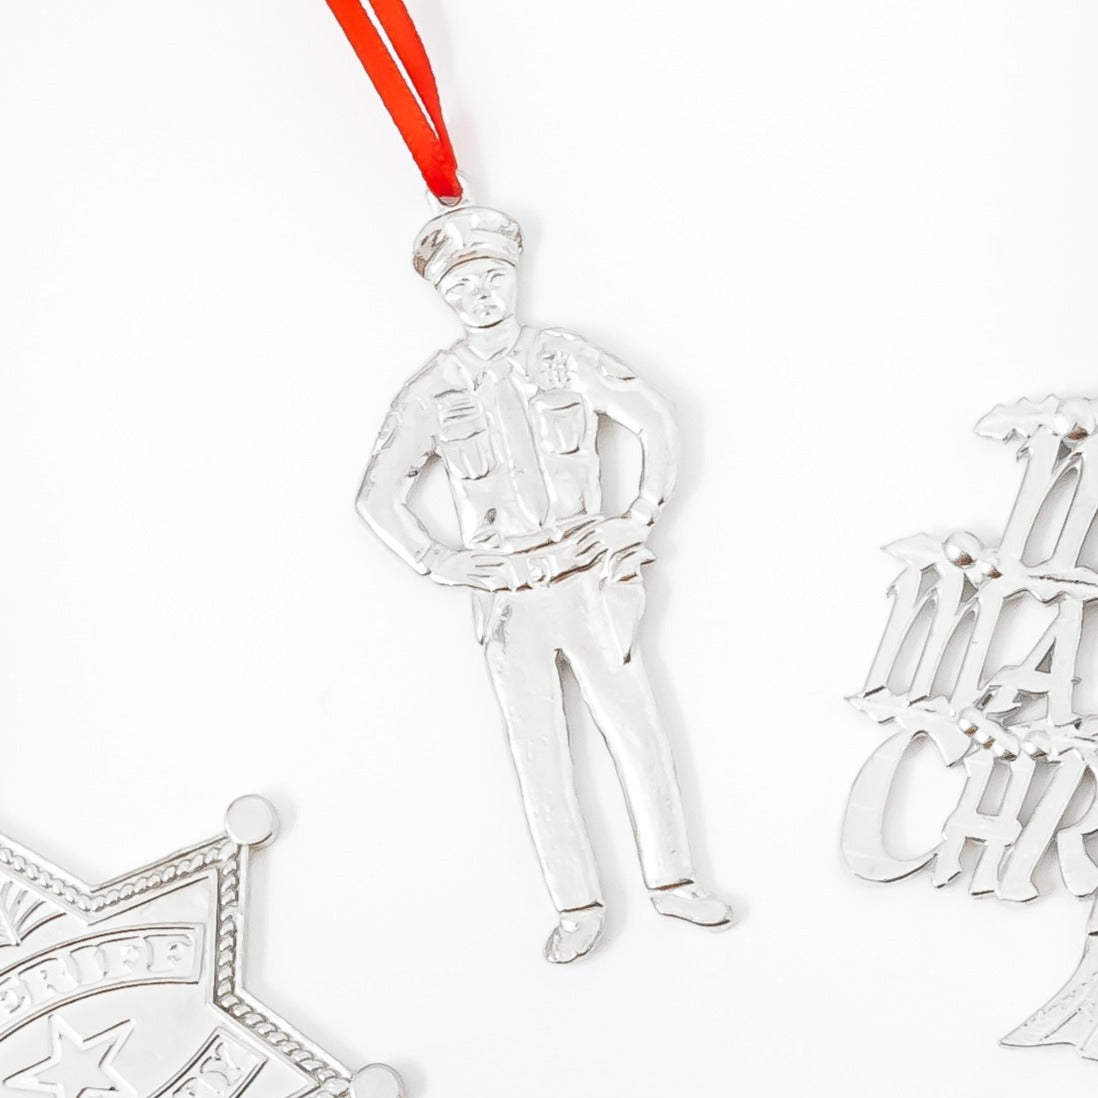 Mayberry Gifts - Sheriff Badge - Gone Fishing - Sheriff - Mayberry Christmas Ornaments